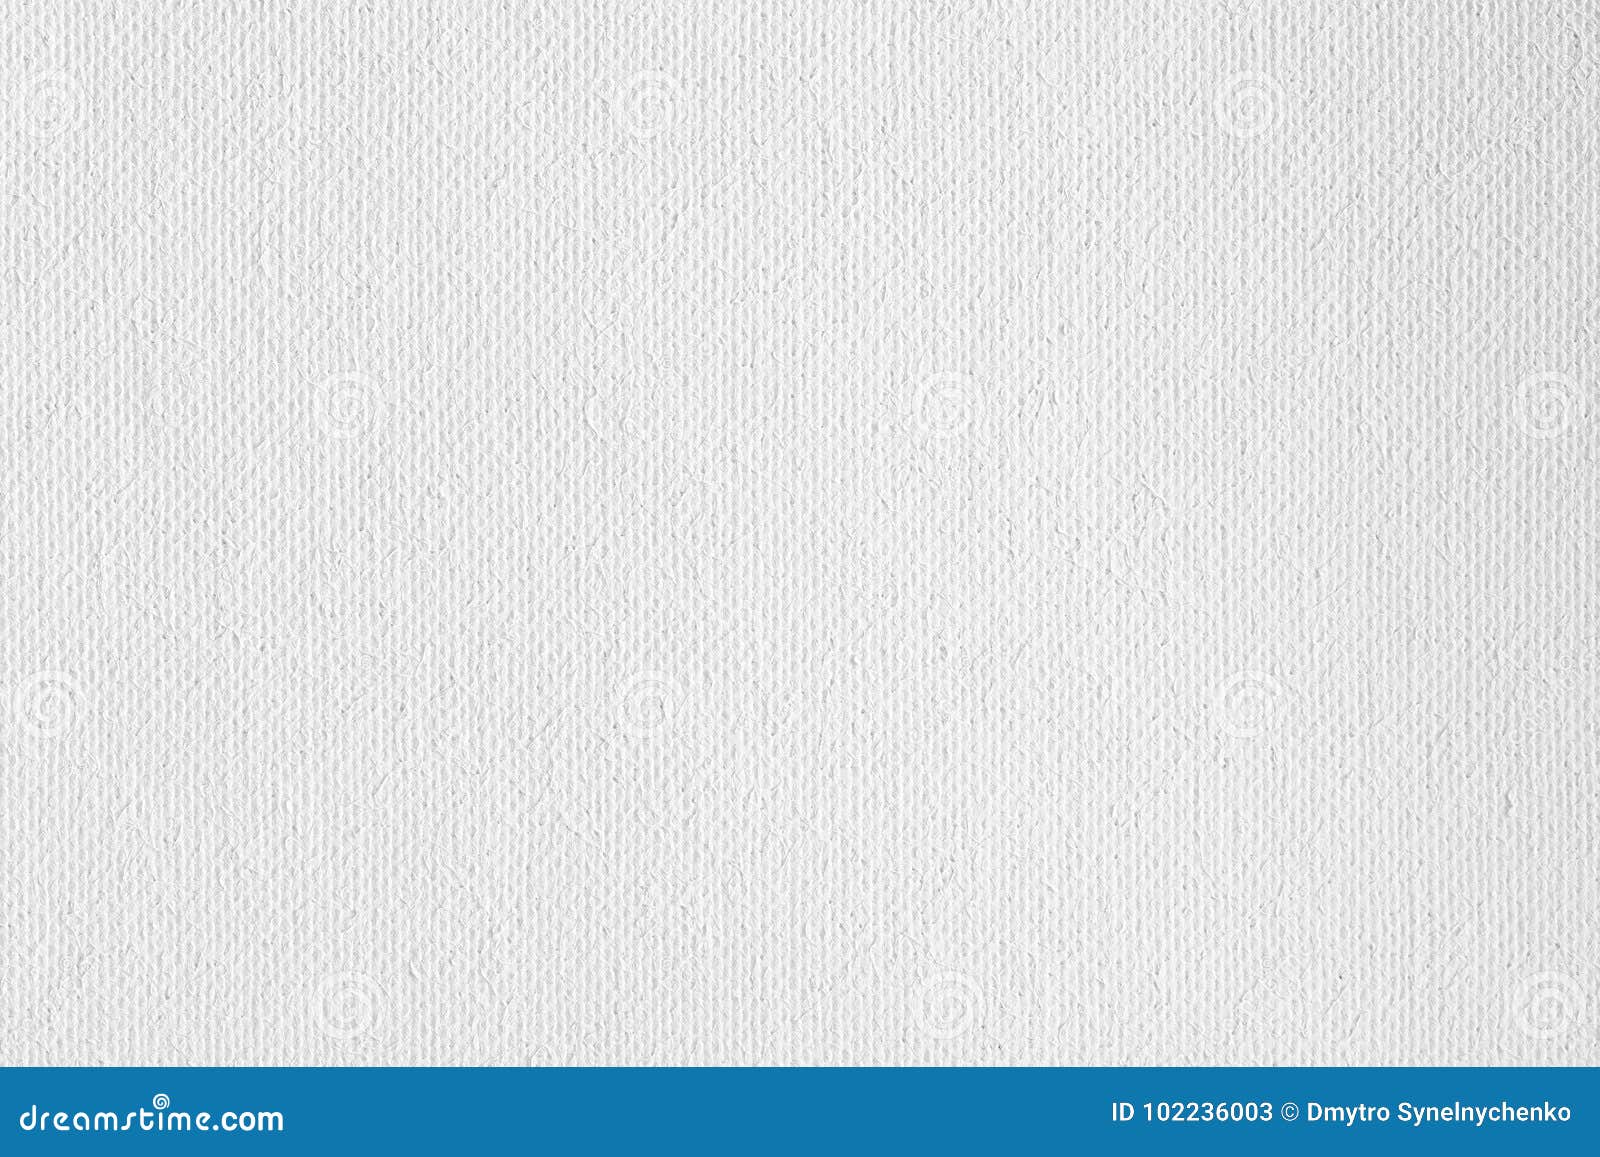 White Canvas Background Stock Photo - Download Image Now